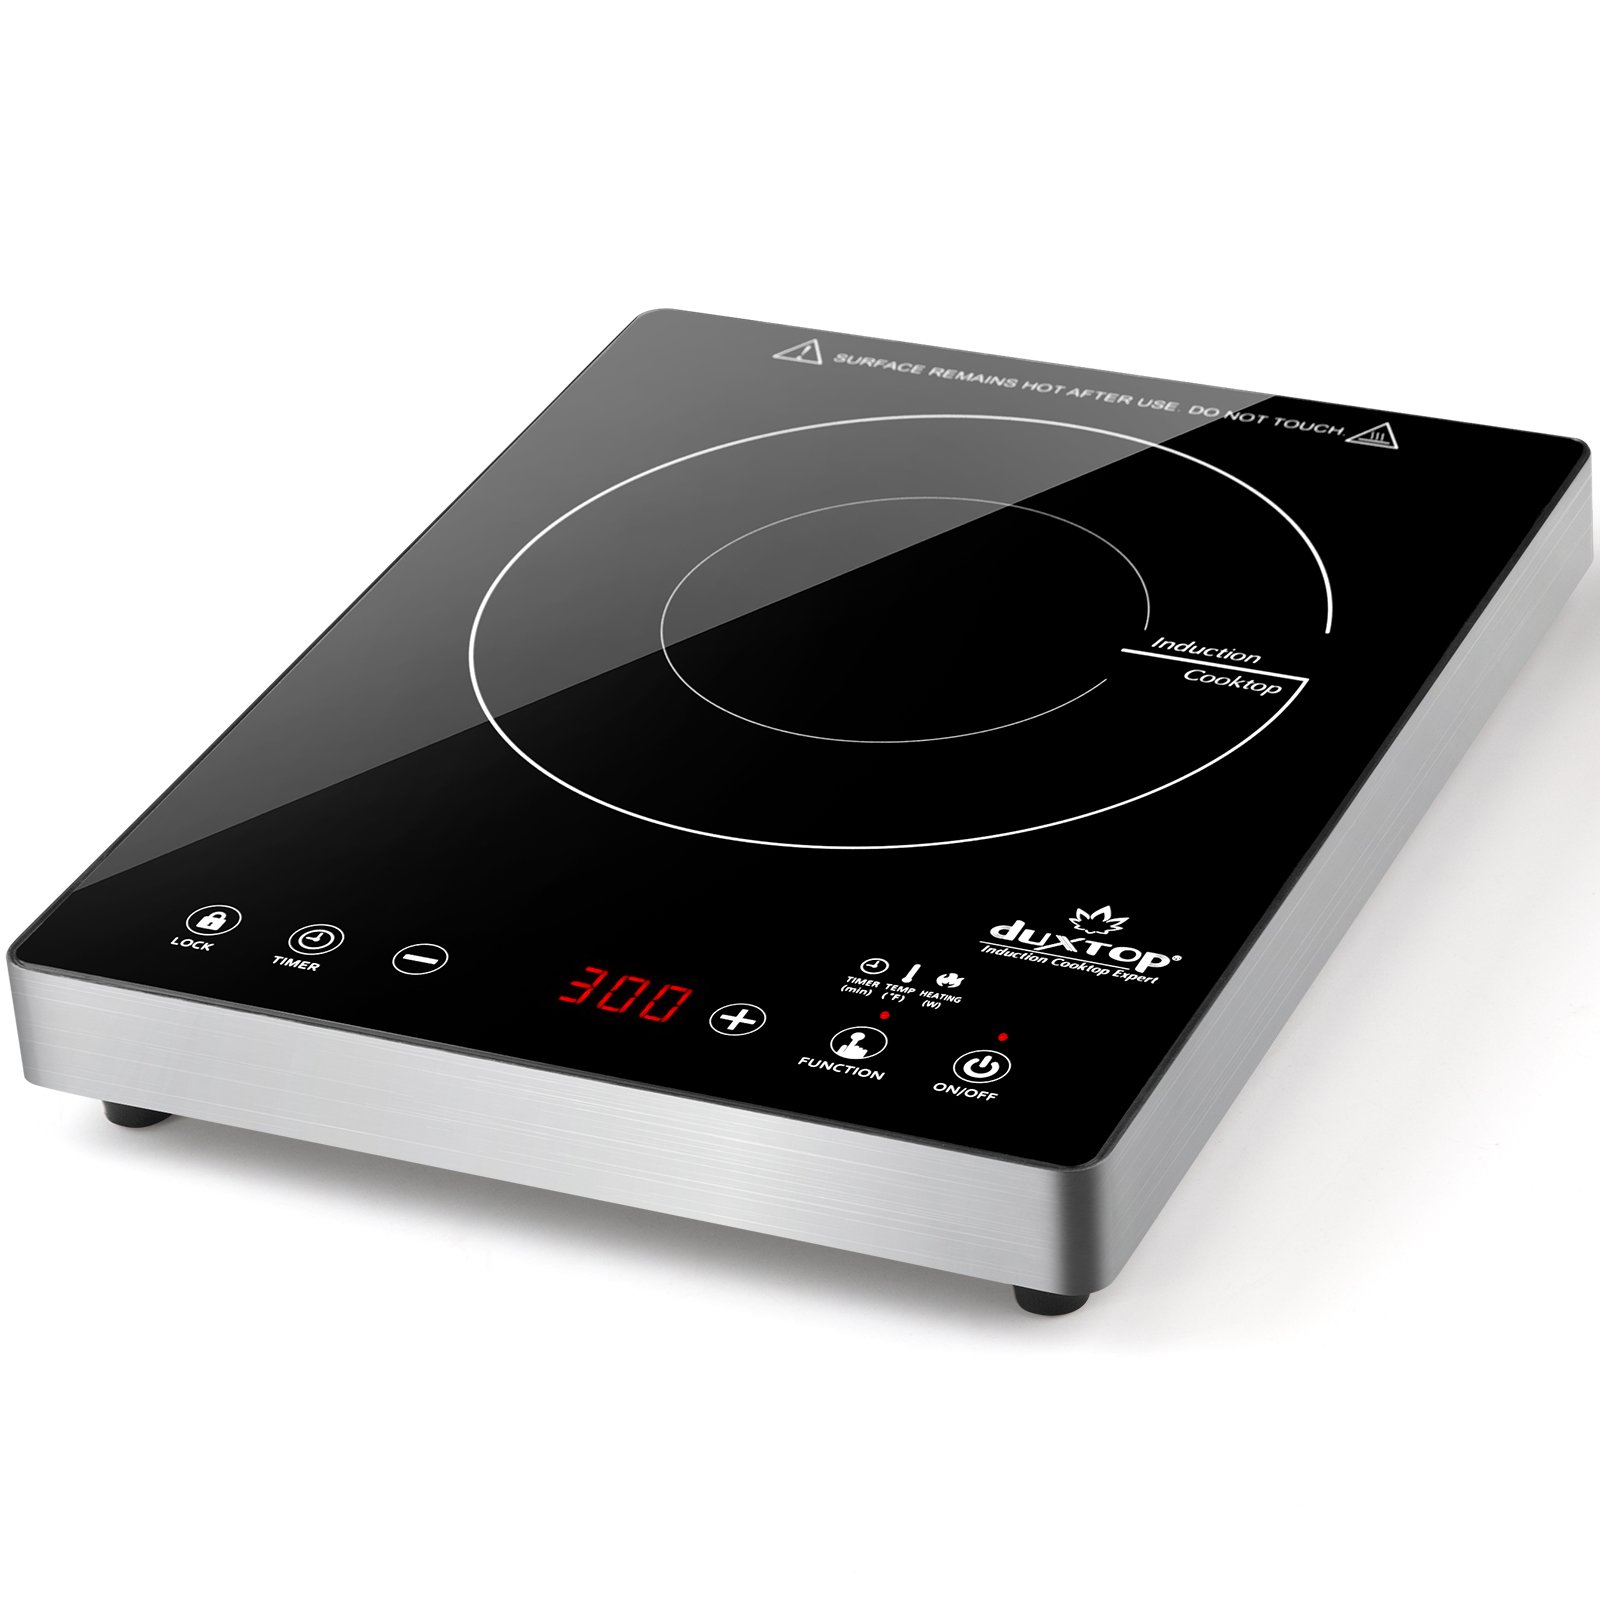 Duxtop Portable Induction Cooktop, High End Full Glass Induction Burner  with Sensor Touch, 1800W Countertop Burner with Stainless Steel Housing,  E200A, Black - The Secura